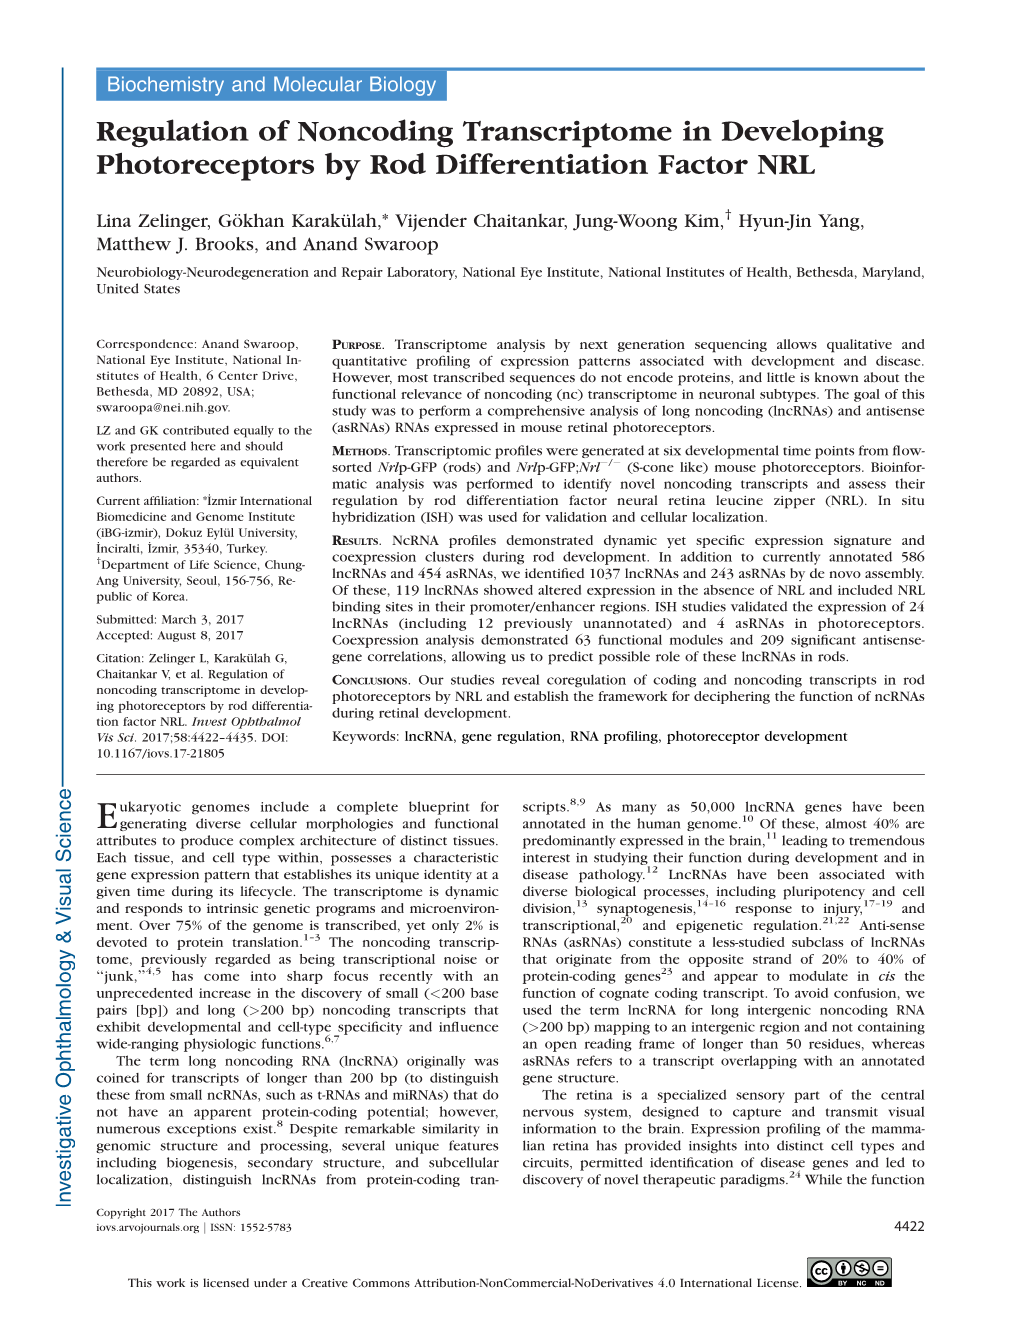 Regulation of Noncoding Transcriptome in Developing Photoreceptors by Rod Differentiation Factor NRL